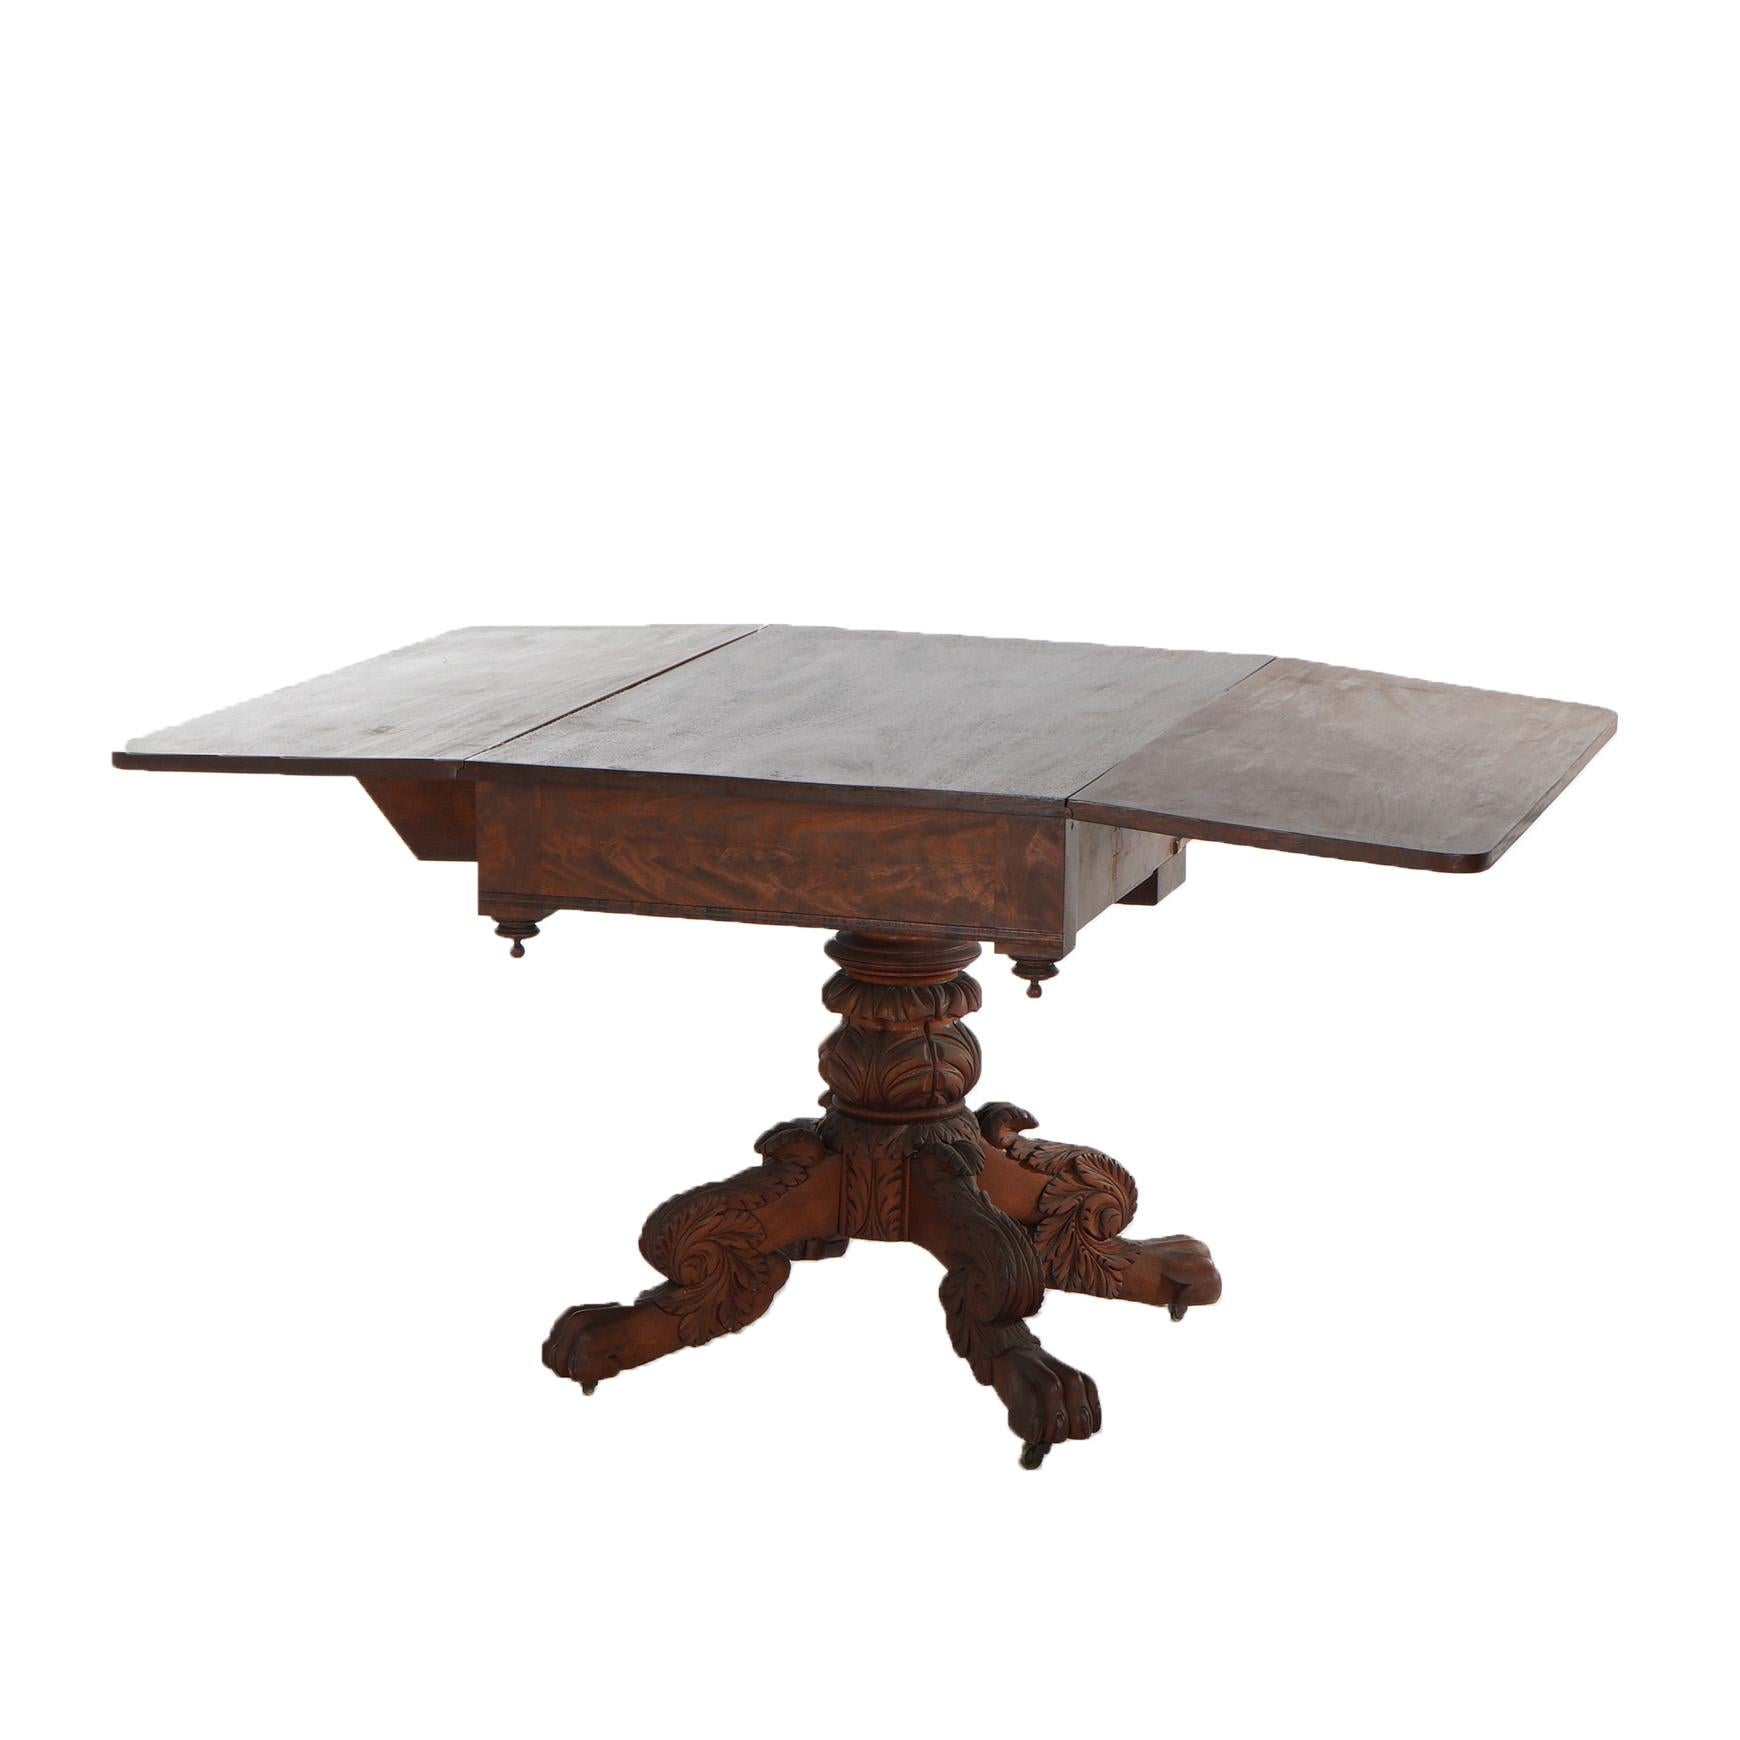 Antique Neoclassical American Empire Carved Flame Mahogany Drop Leaf Table c1880 For Sale 10